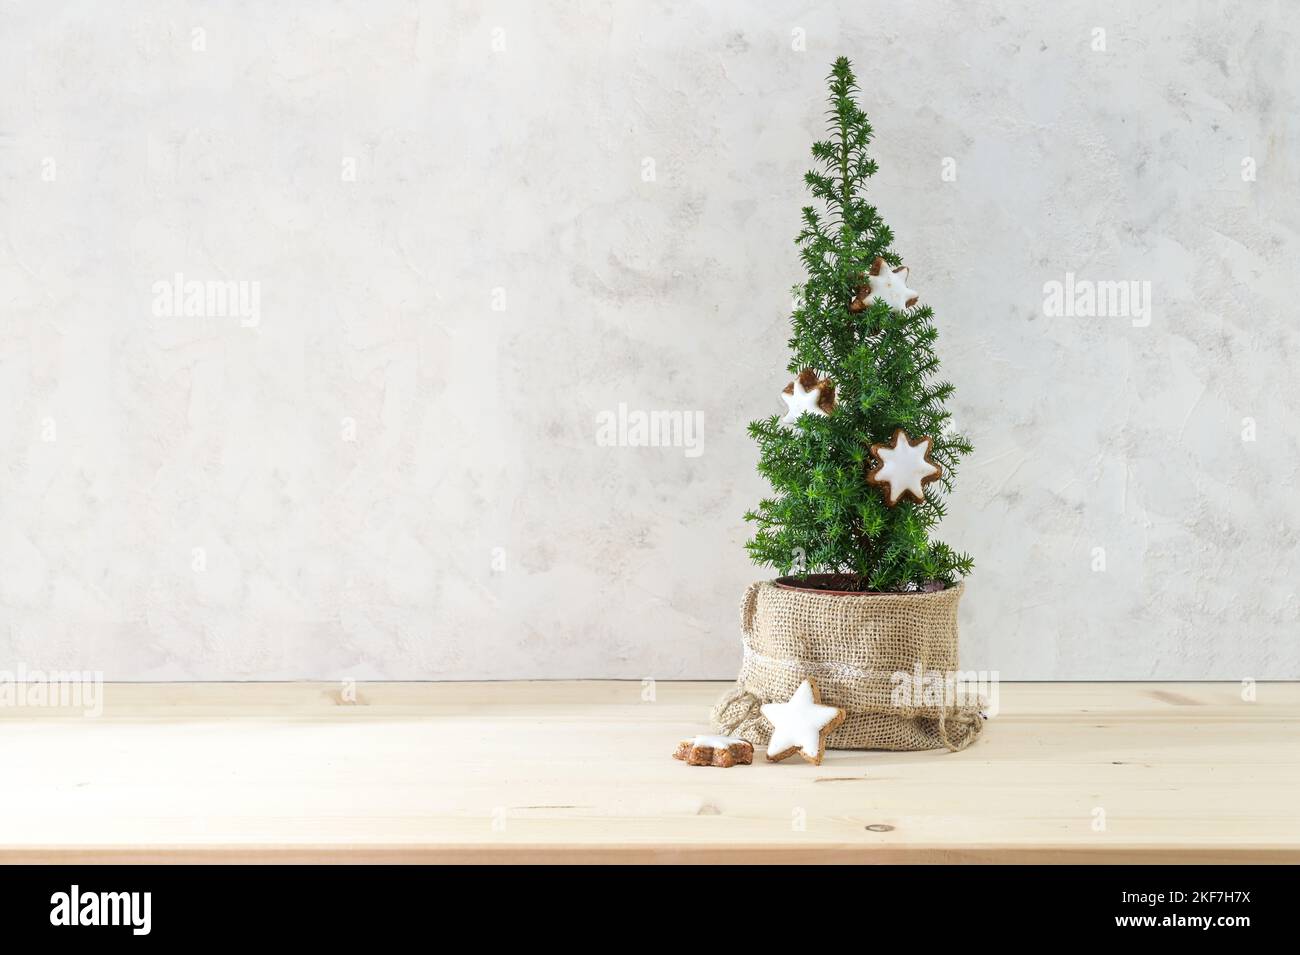 Small conifer plant decorated with cinnamon star cookies as a minimalist Christmas tree, light background with large copy space Stock Photo